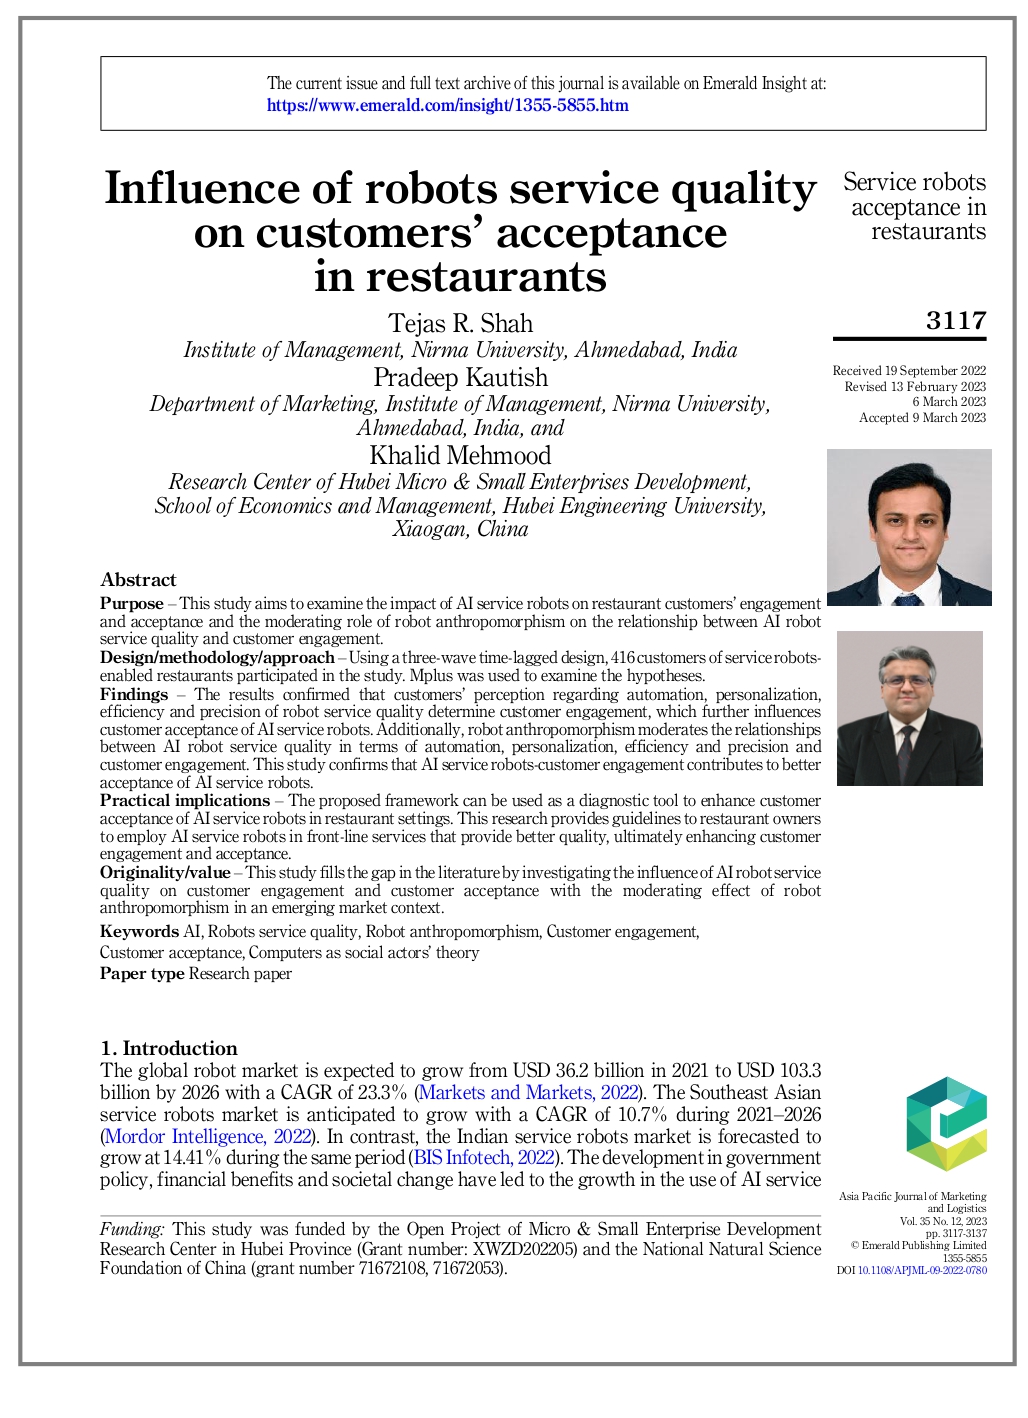 Influence of robots service quality on customers’ acceptance in restaurants